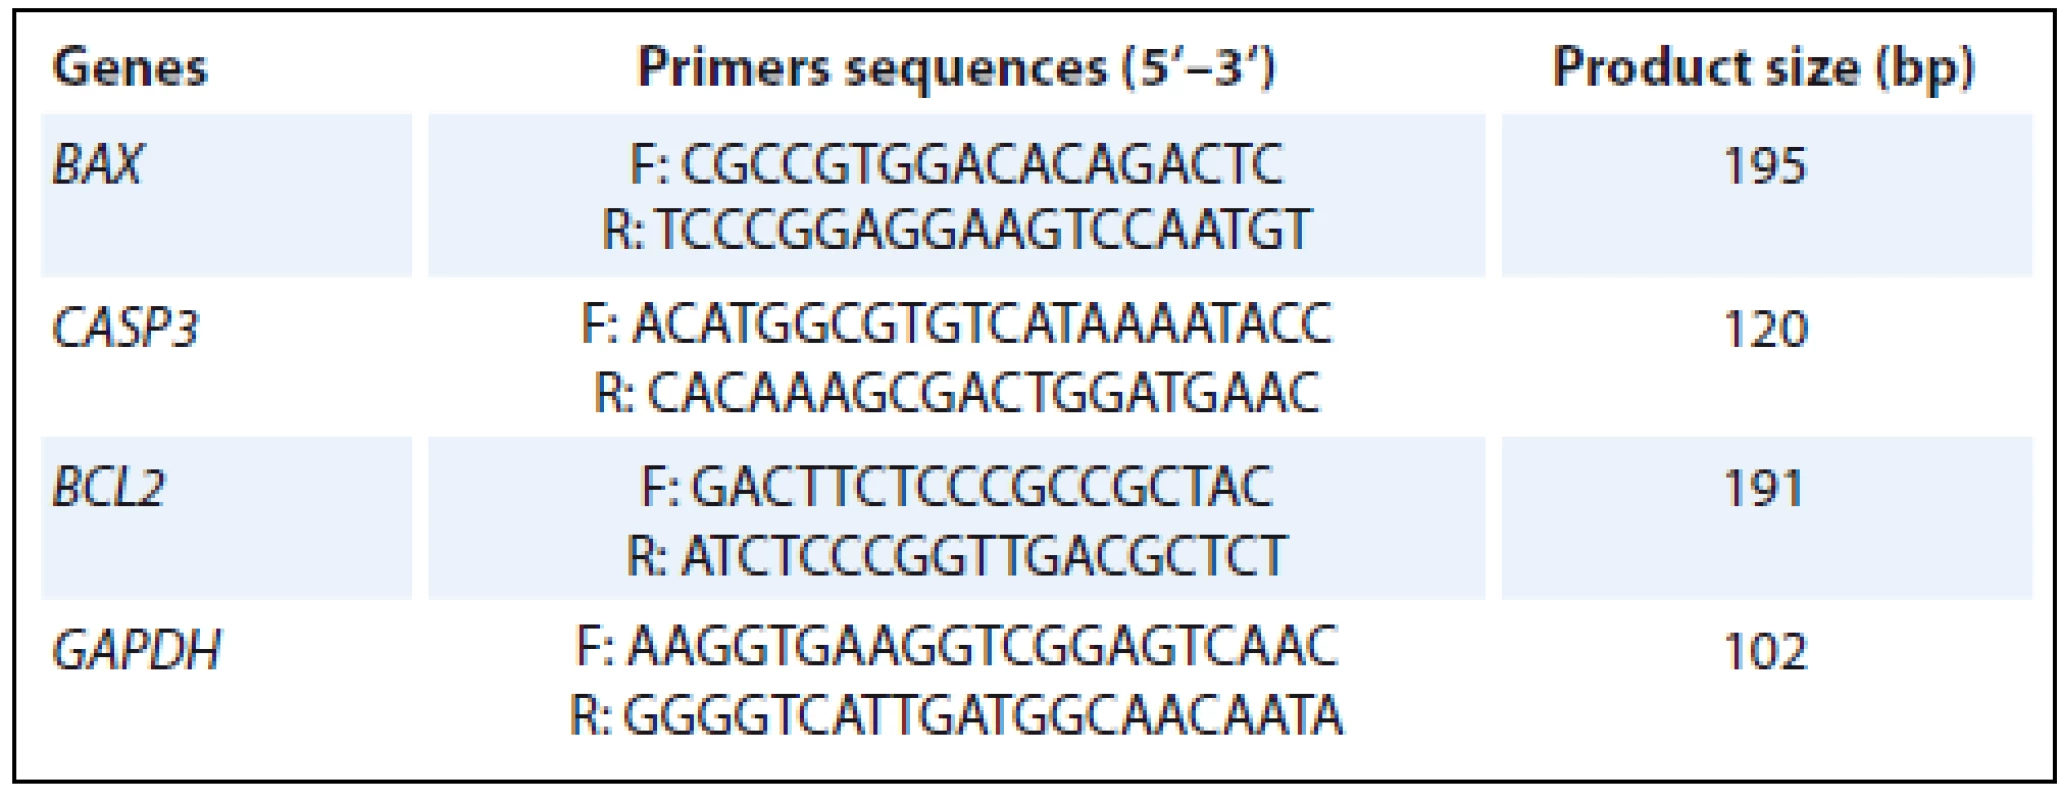 The primer sequences that were used in real time PCR.